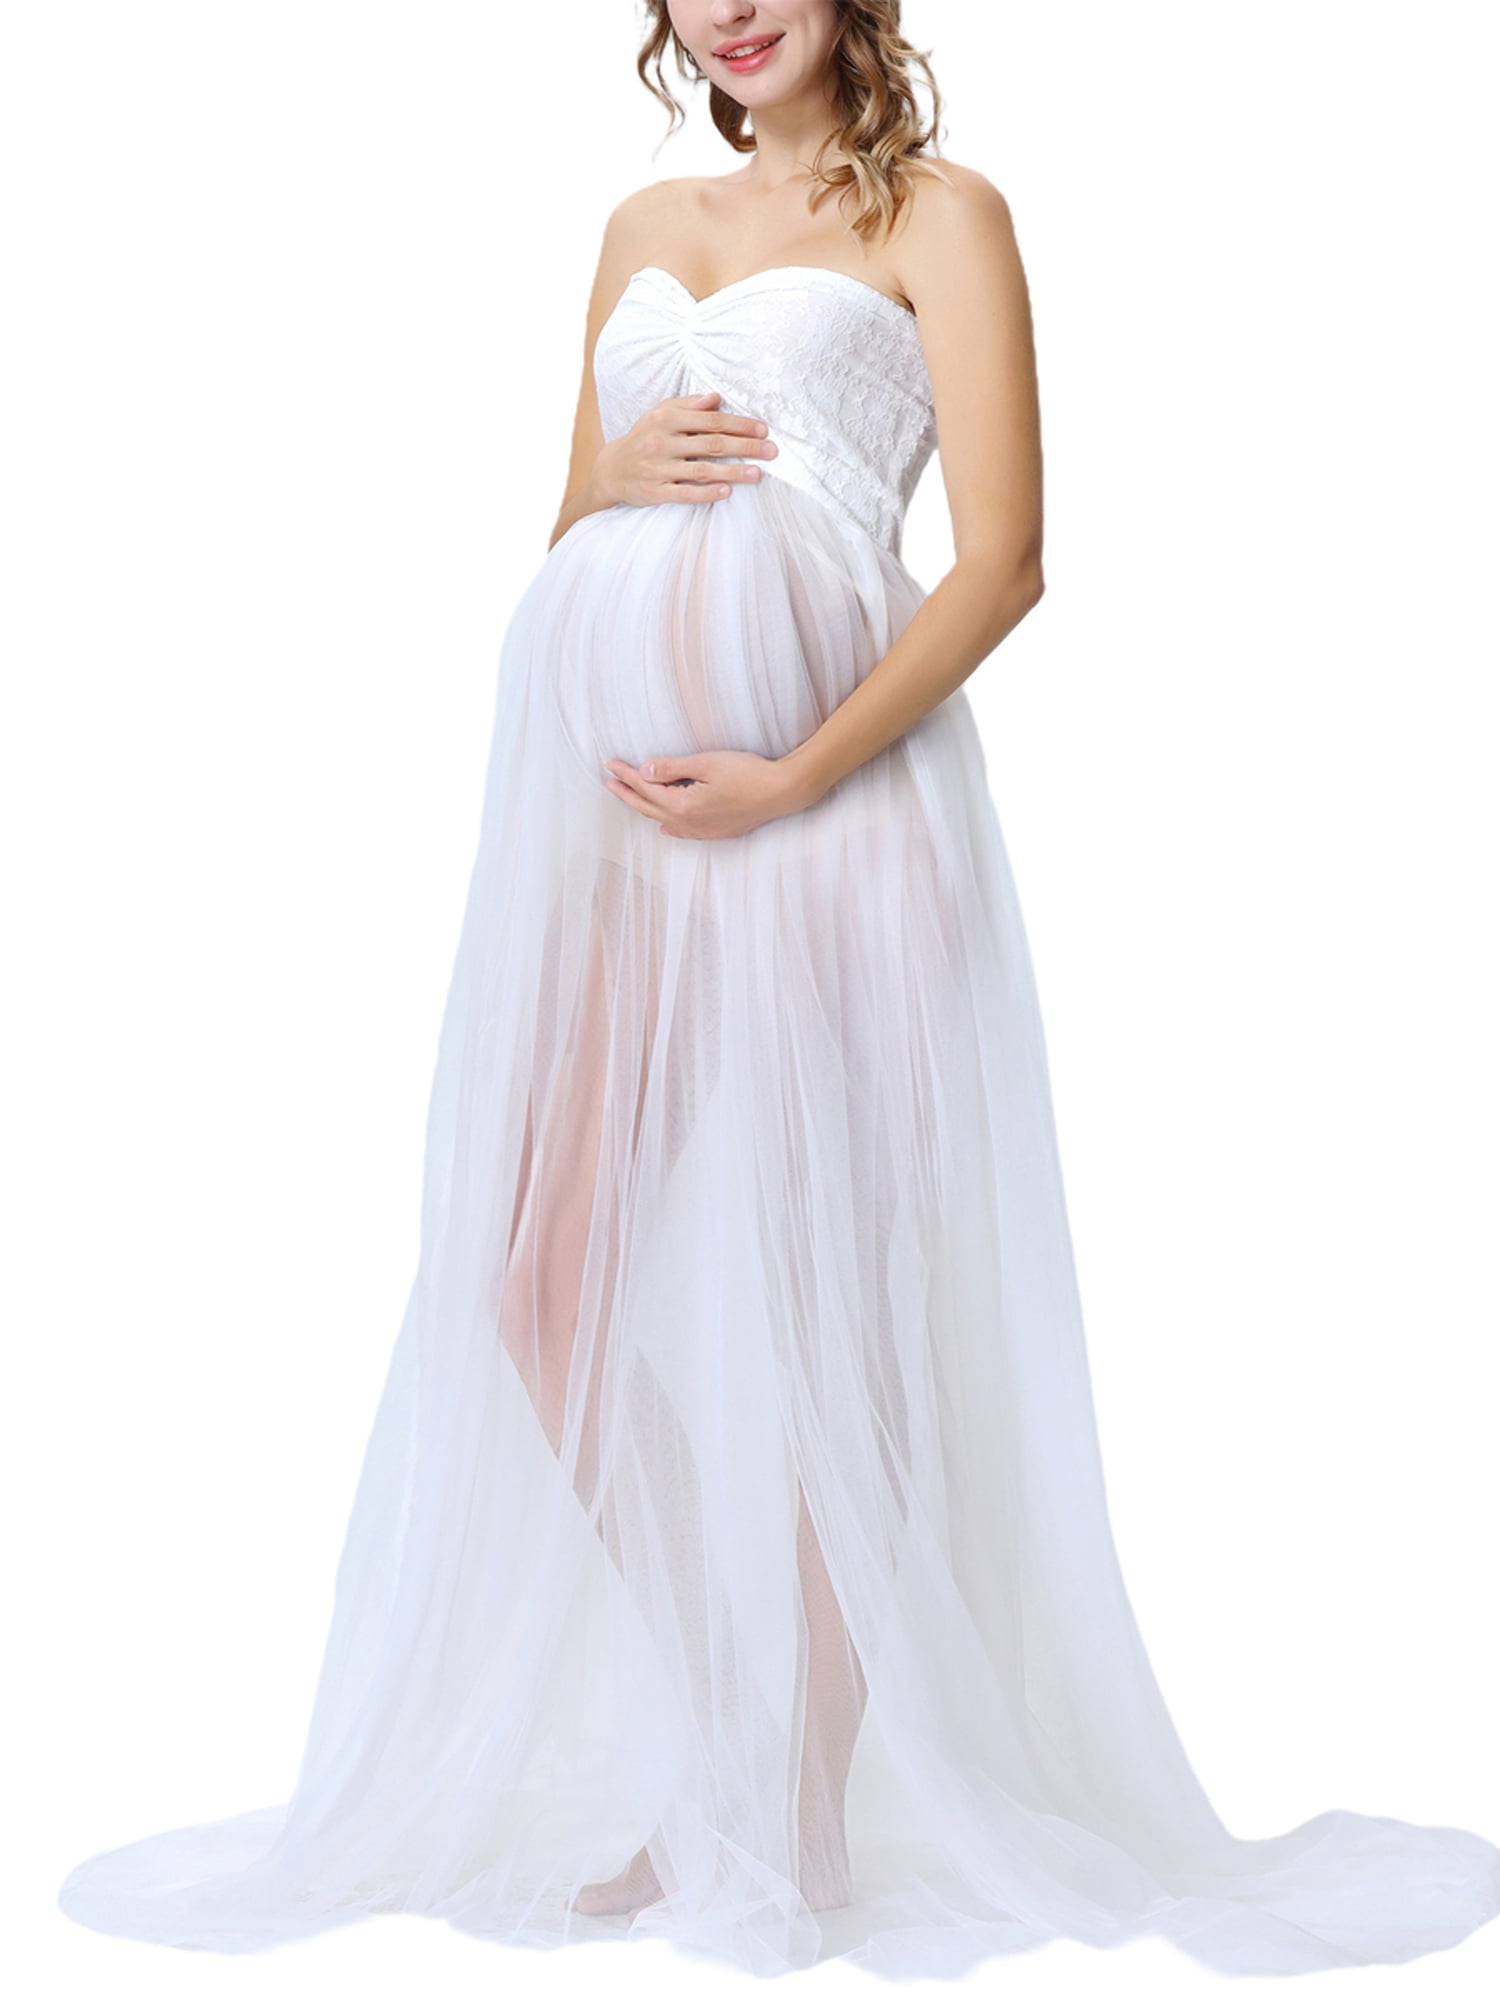 Maternity Dress Hire for all occasions | Mama Rentals, Australia